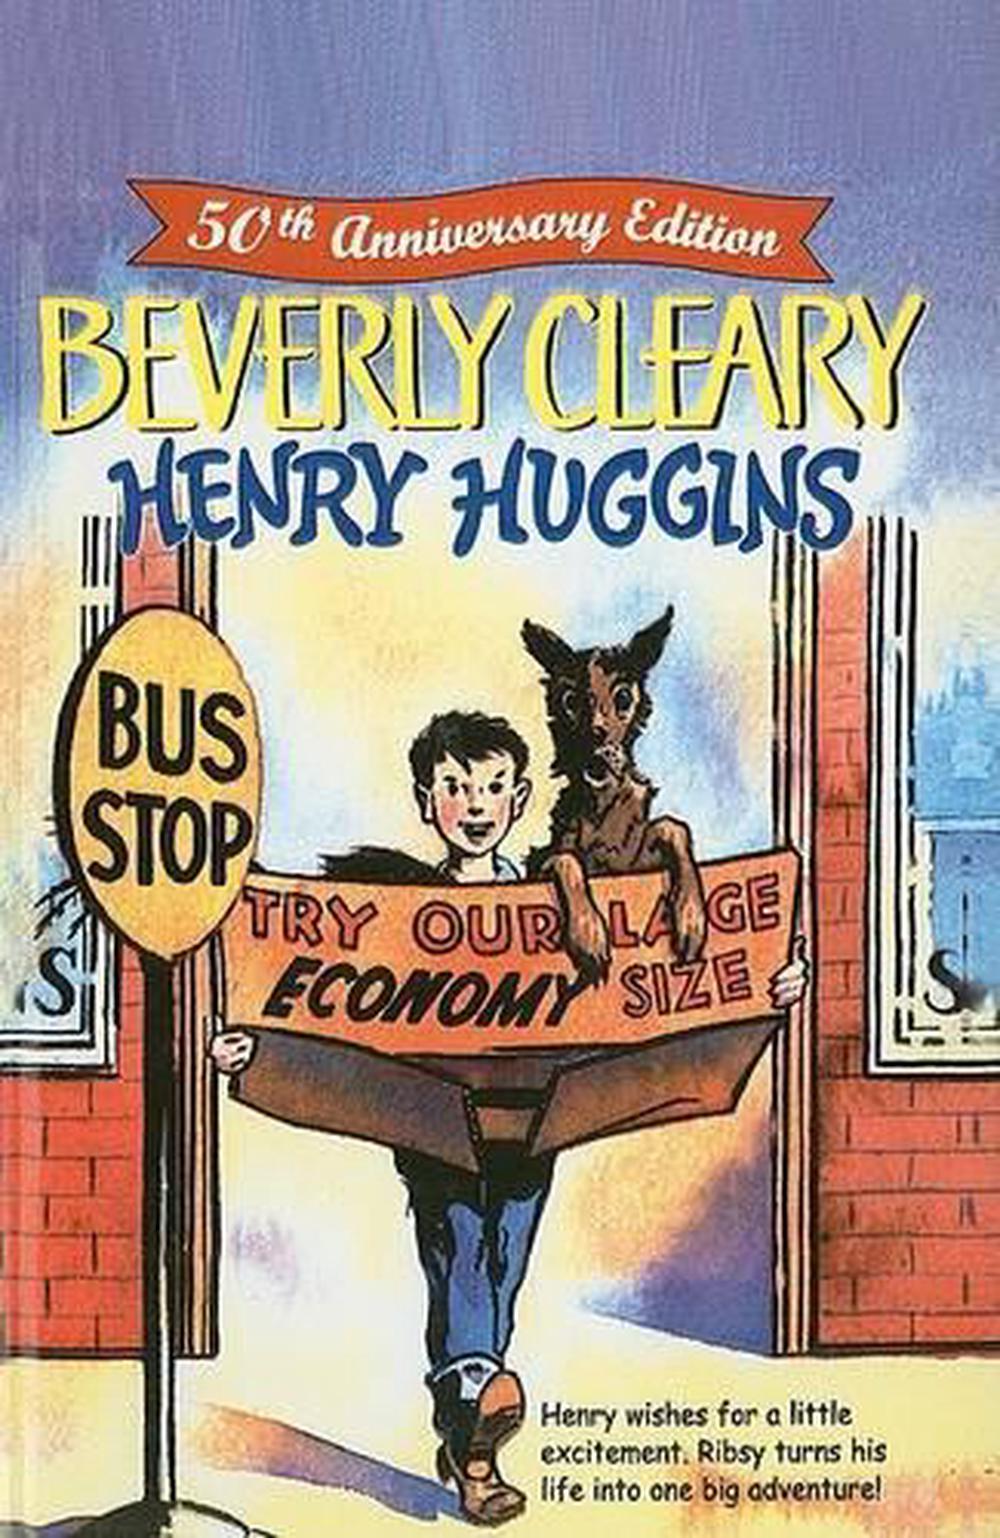 93 Top Best Writers Age Range For Beverly Cleary Books from Famous authors